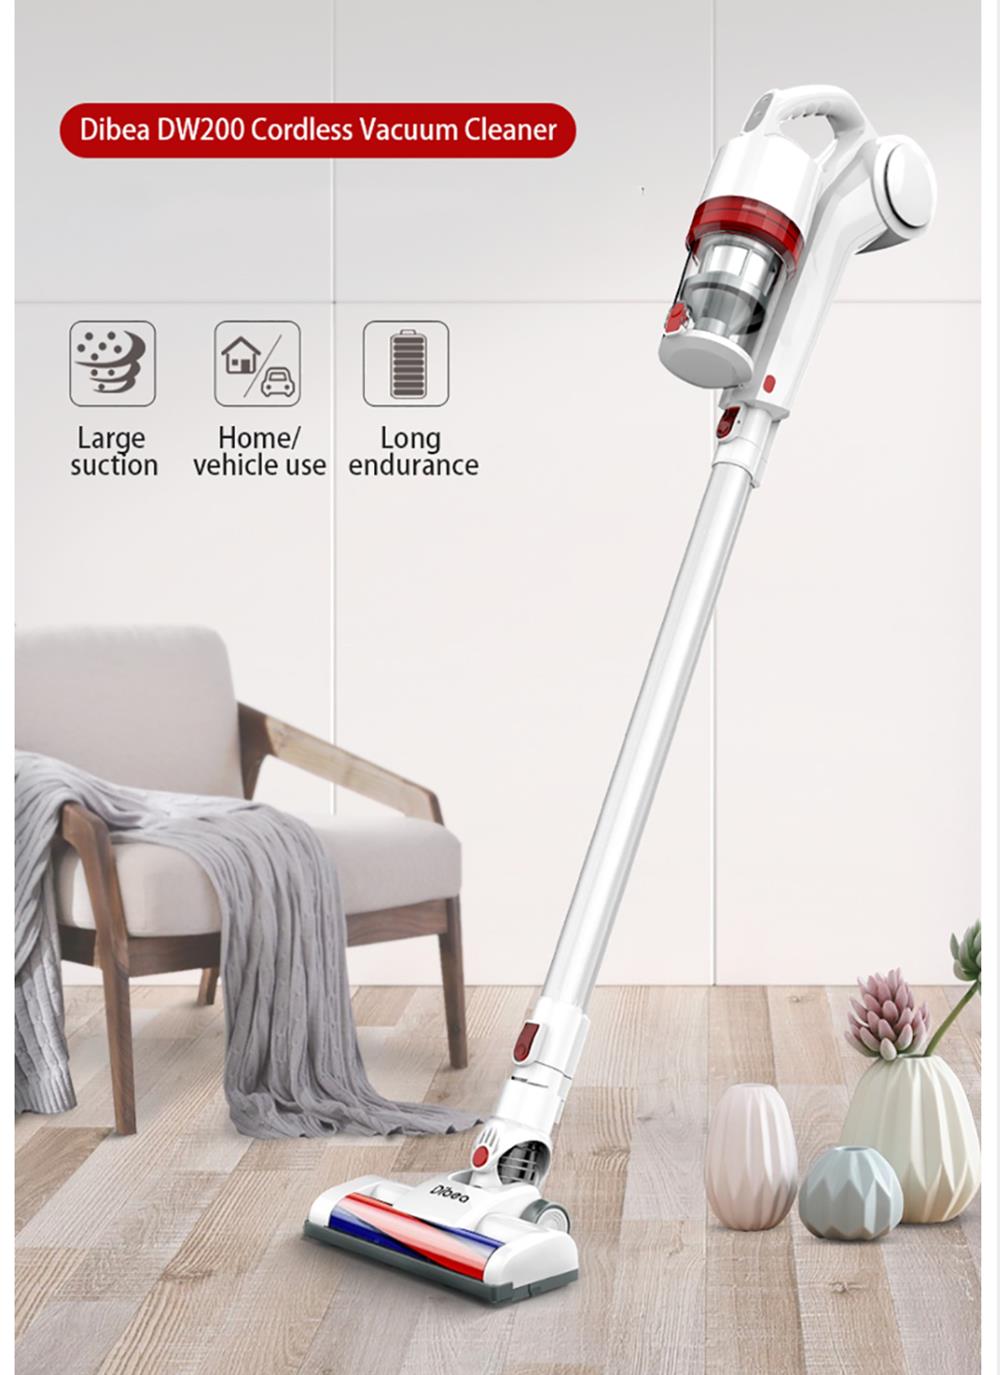 Dibea-DW200-Cordless-Vacuum-Cleaner-10KPa-Strong-Suction-Dust-Collector-With-Wall-Hanging-Rack-1417397